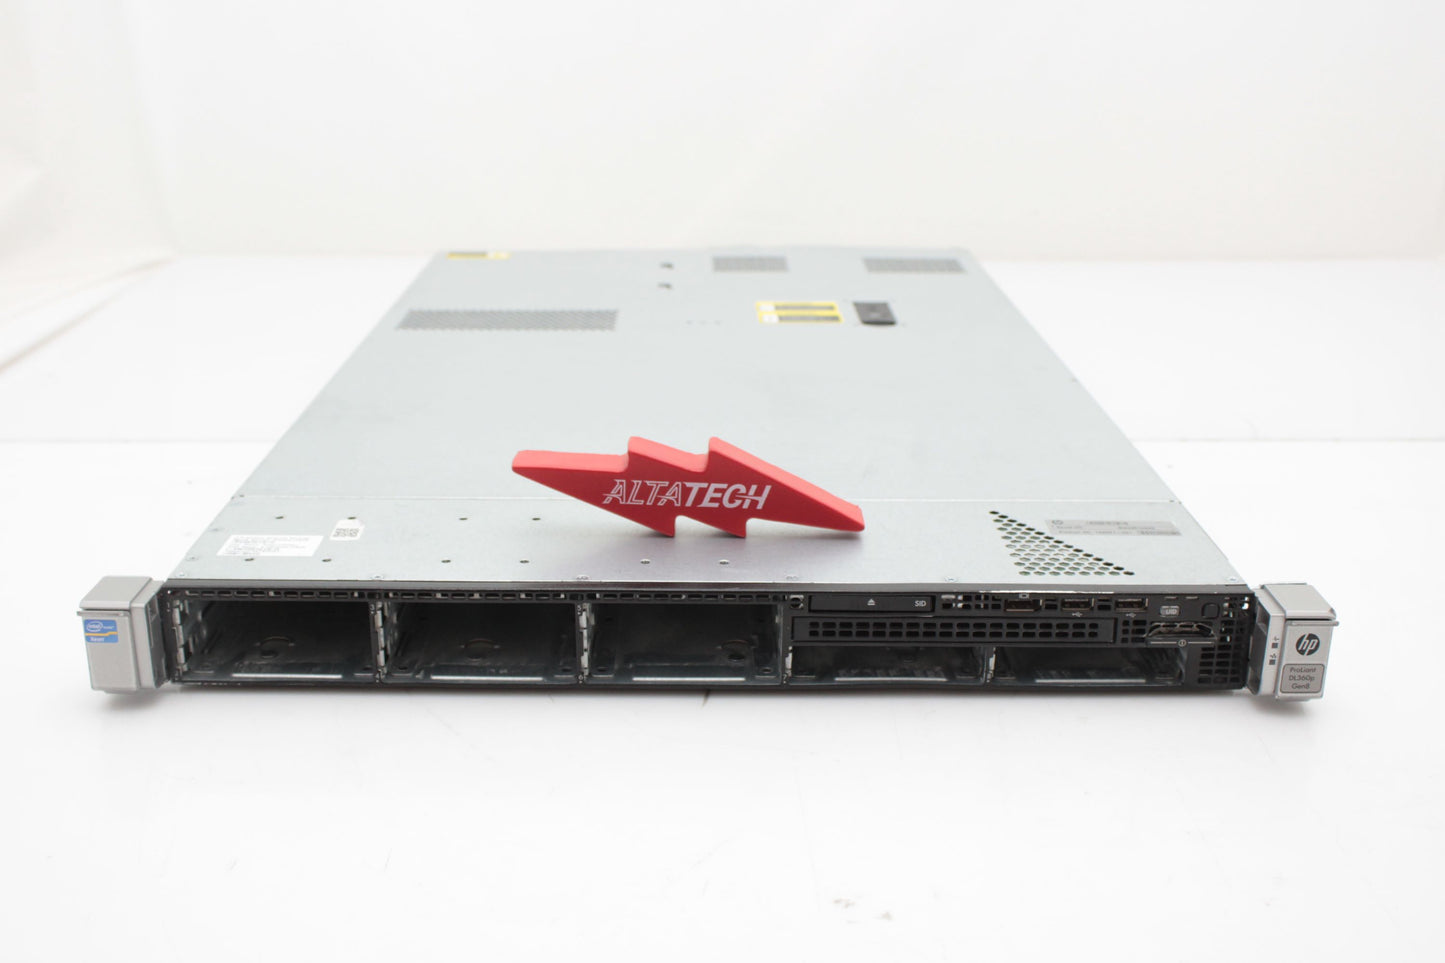 HP 755258-B21 ProLiant DL360 G9 CTO Server Chassis 8x SFF Bays, Used